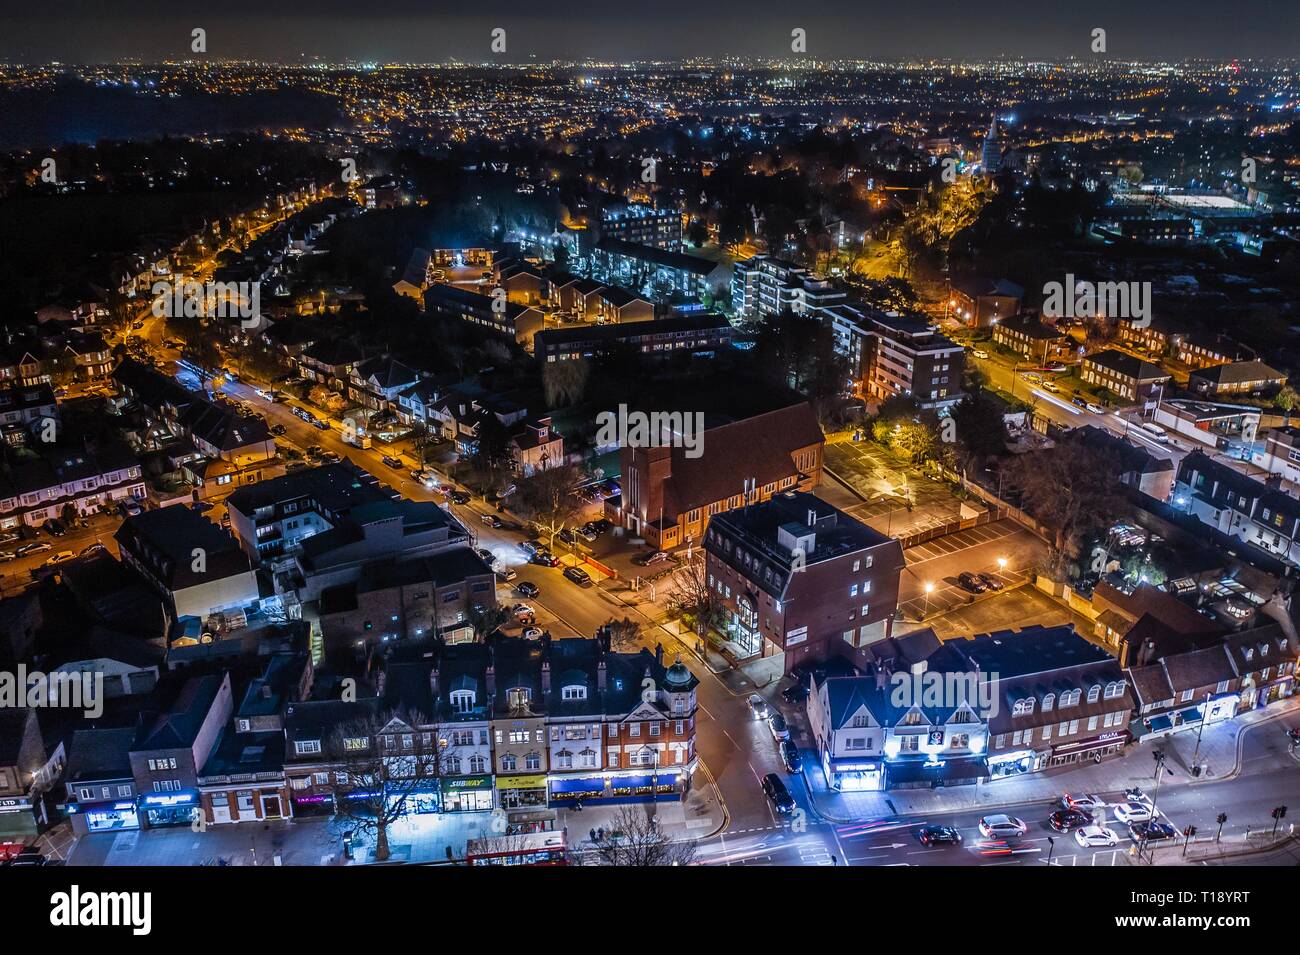 Aerial images of North London suburbs at night Stock Photo